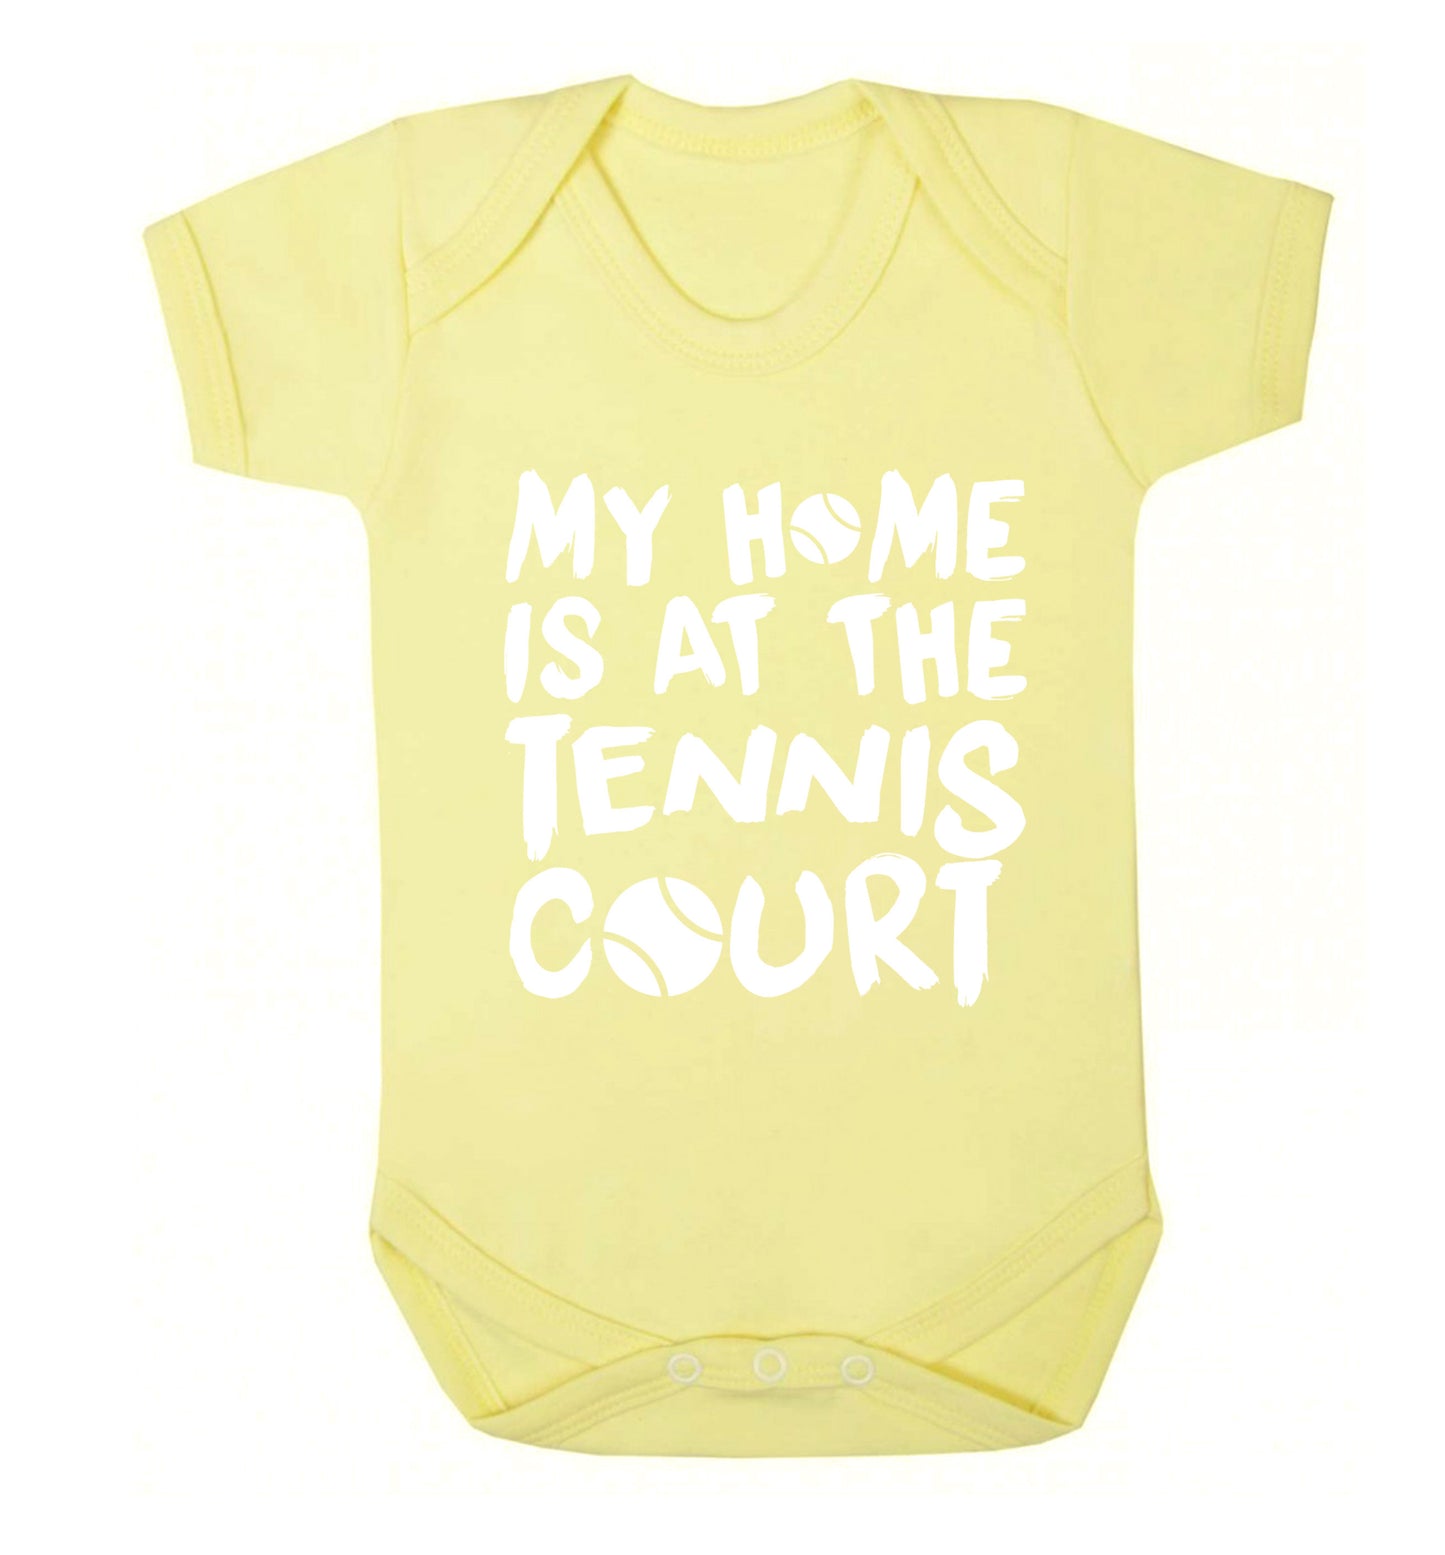 My home is at the tennis court Baby Vest pale yellow 18-24 months